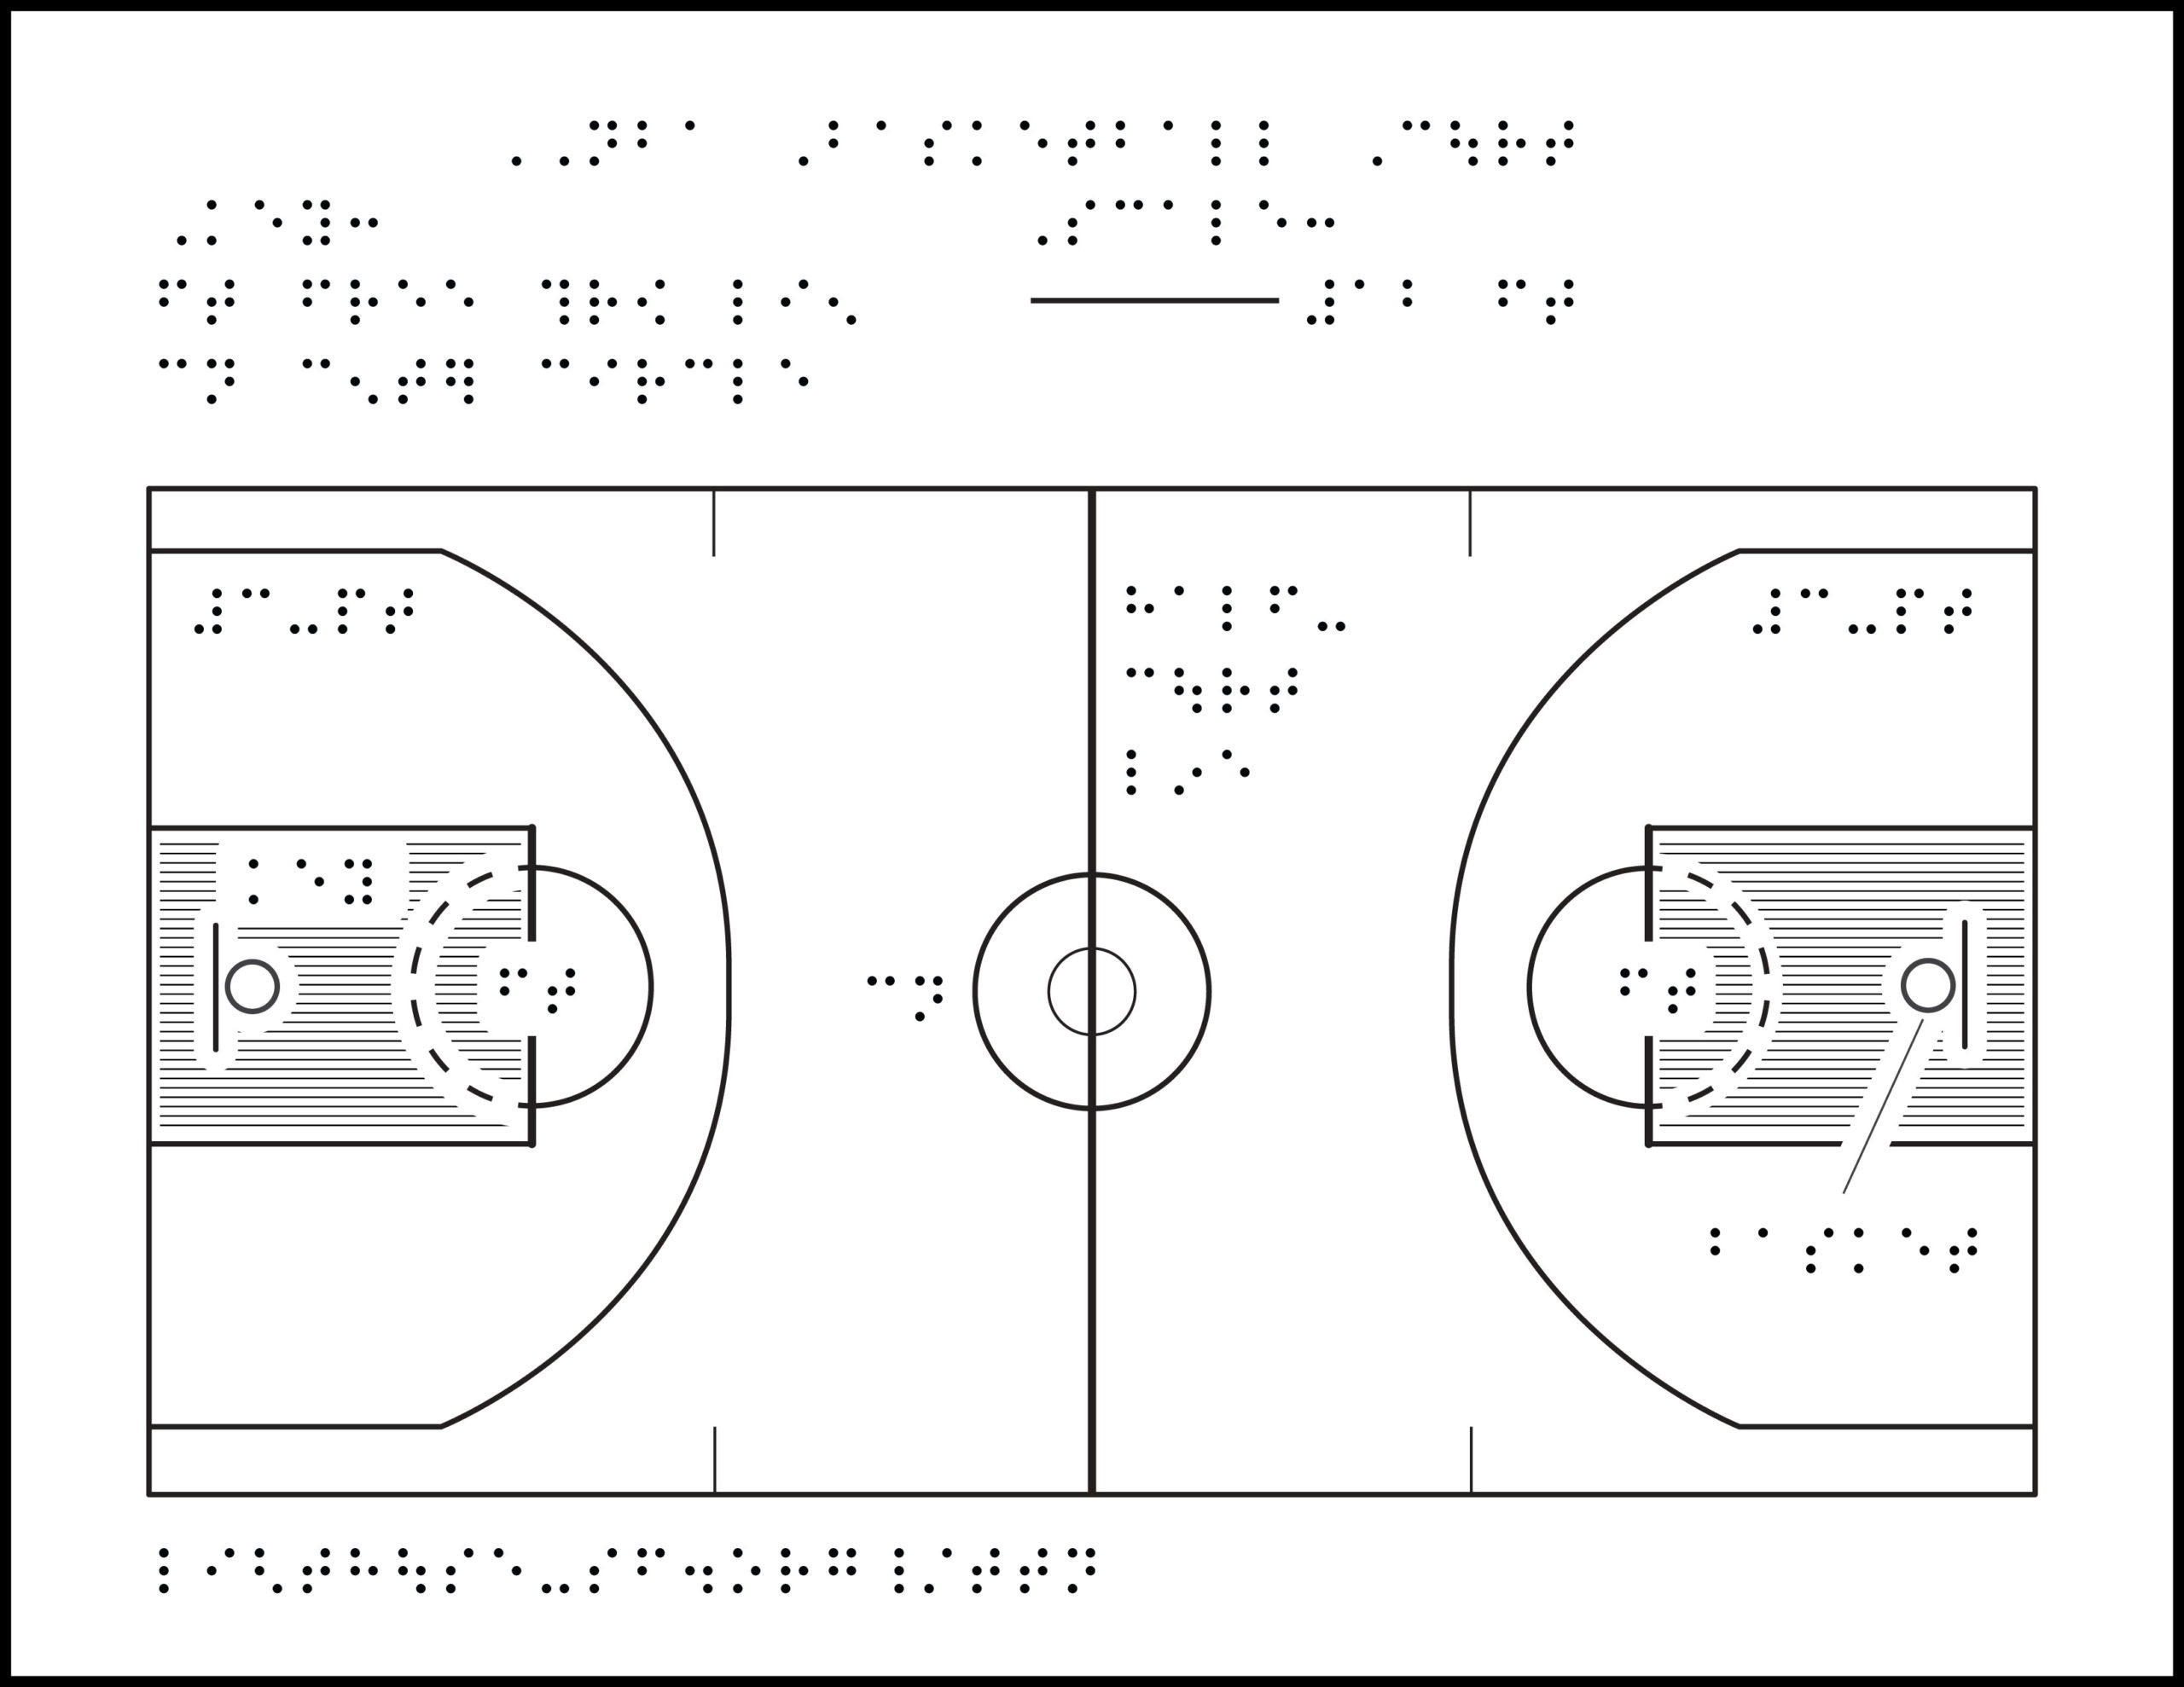 Illustration of a basketball court with braille labels